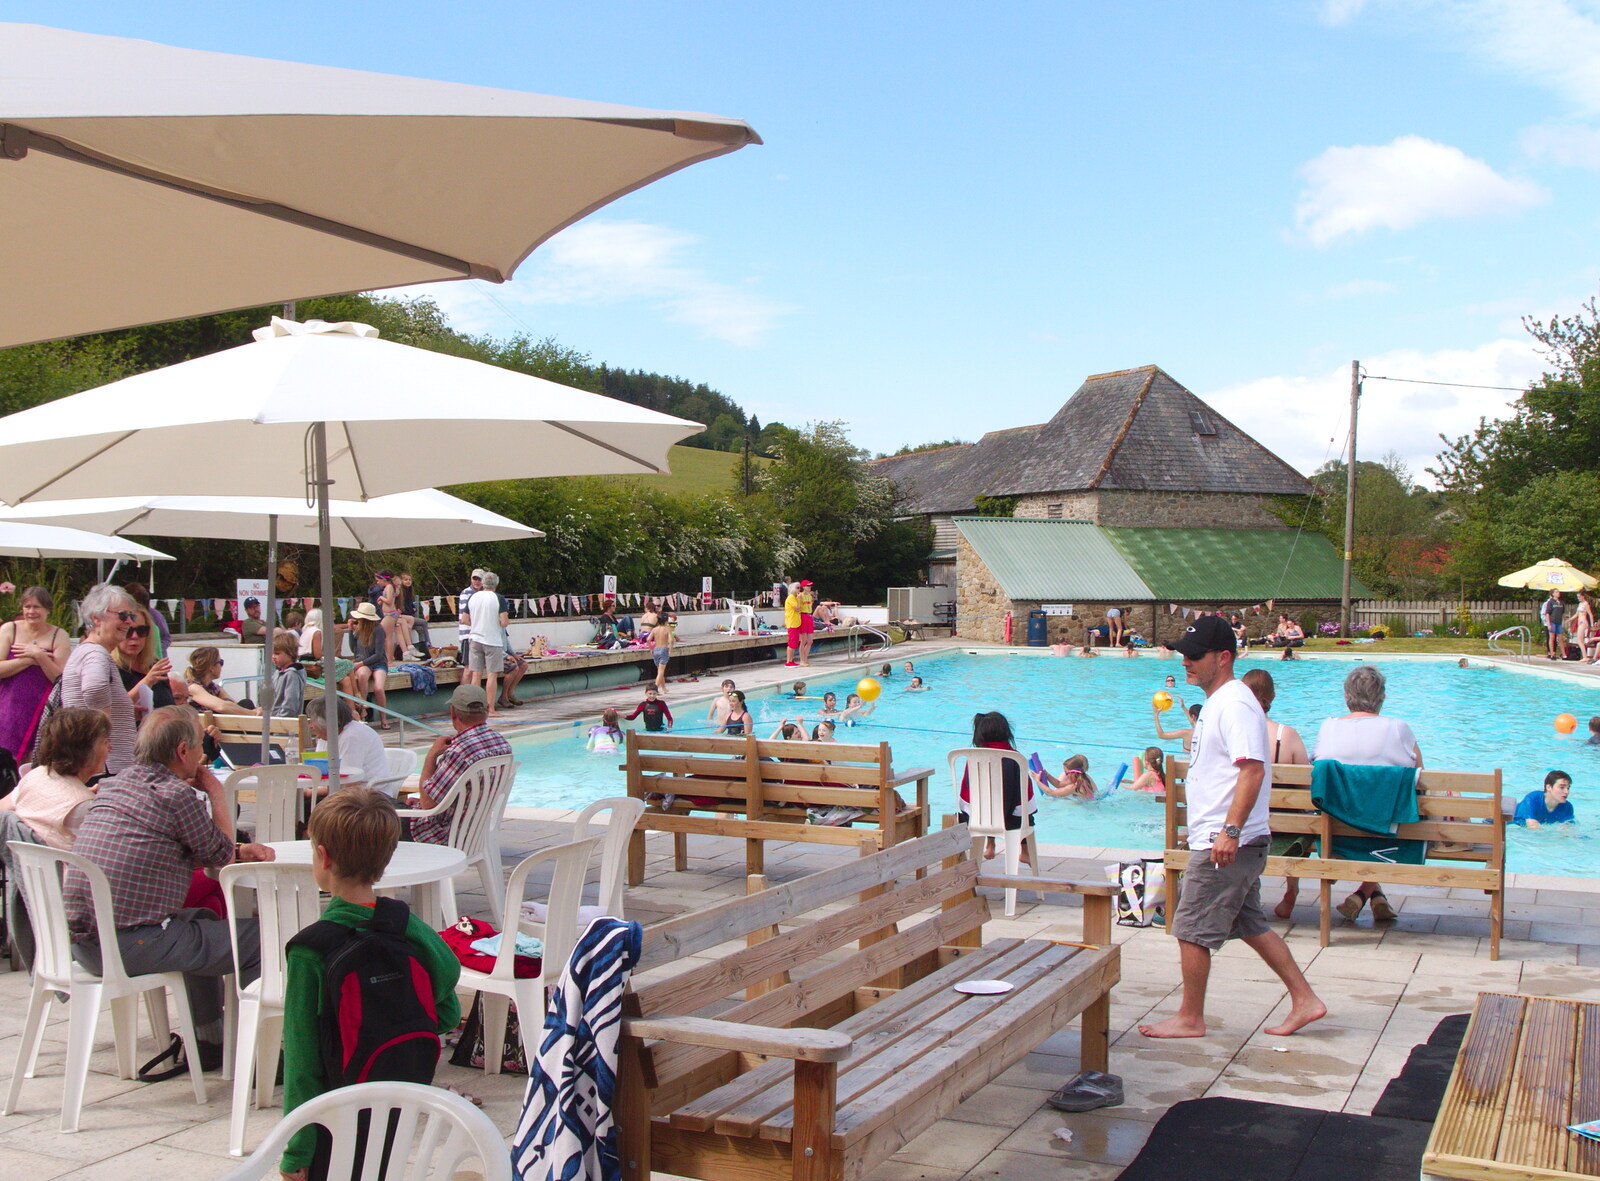 Chagford Lido and a Trip to Parke, Bovey Tracey, Devon - 25th May 2019: It's busy down at the Lido